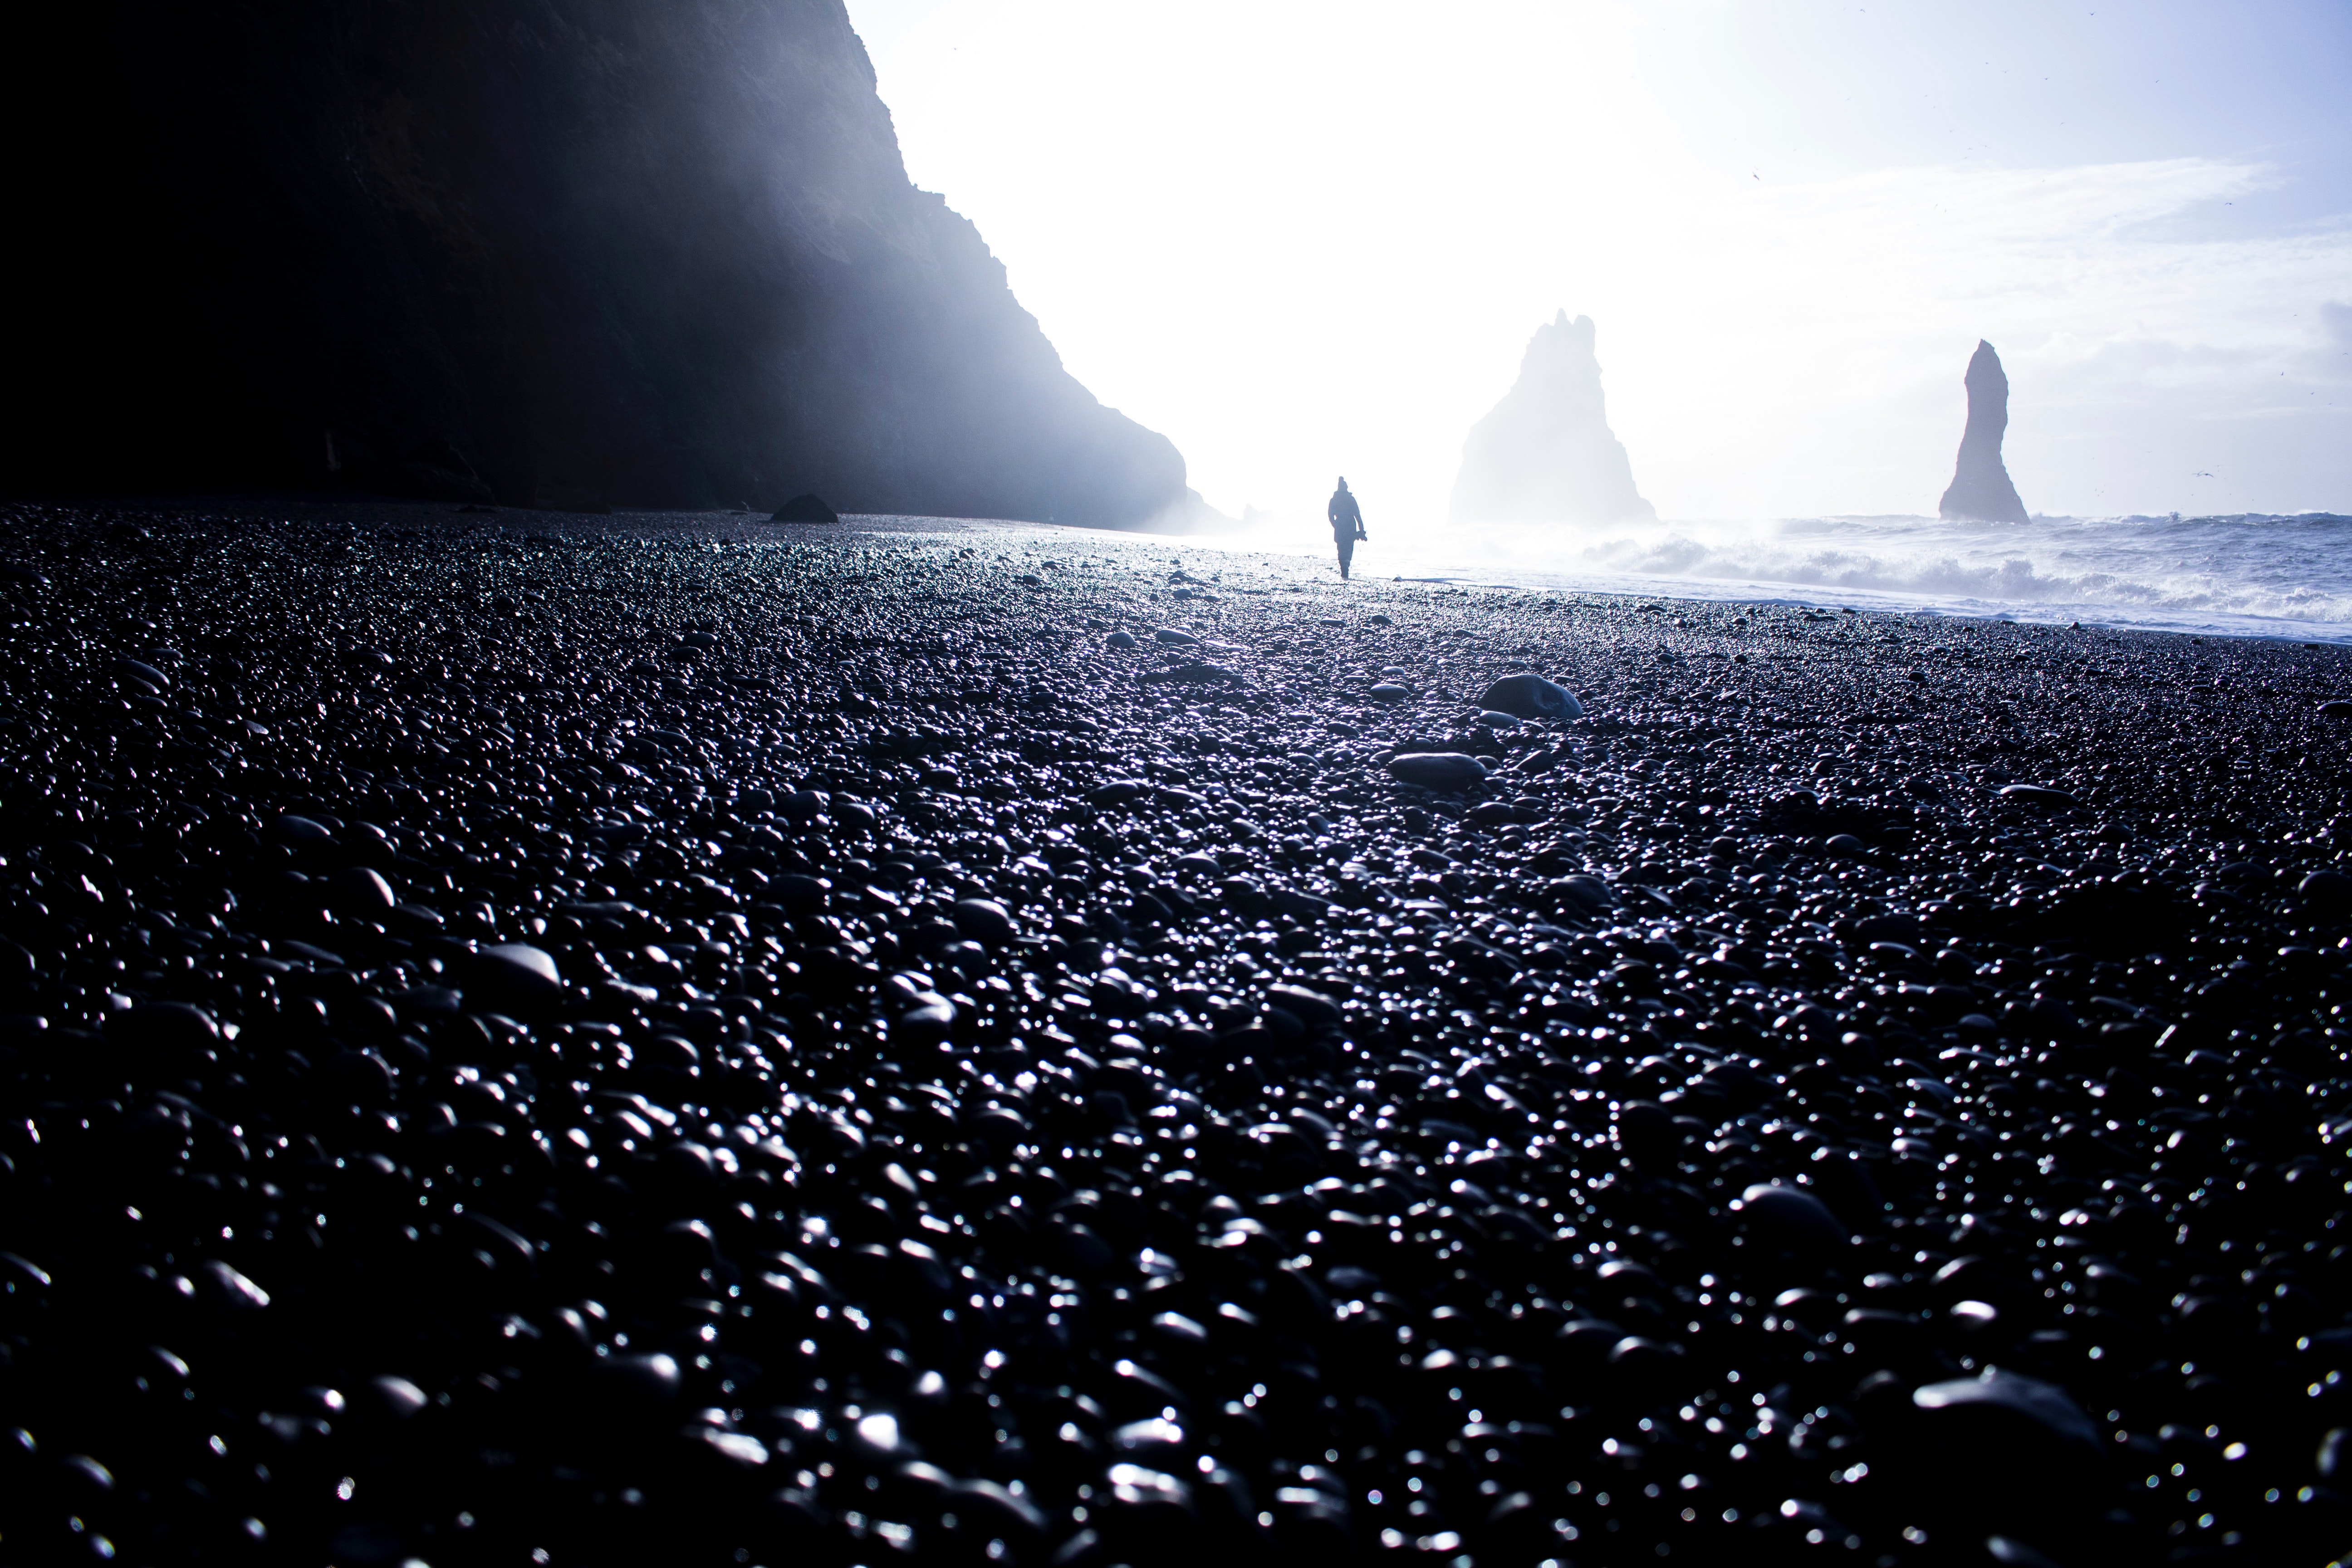 116144 download wallpaper pebble, dark, coast, silhouette, fog screensavers and pictures for free